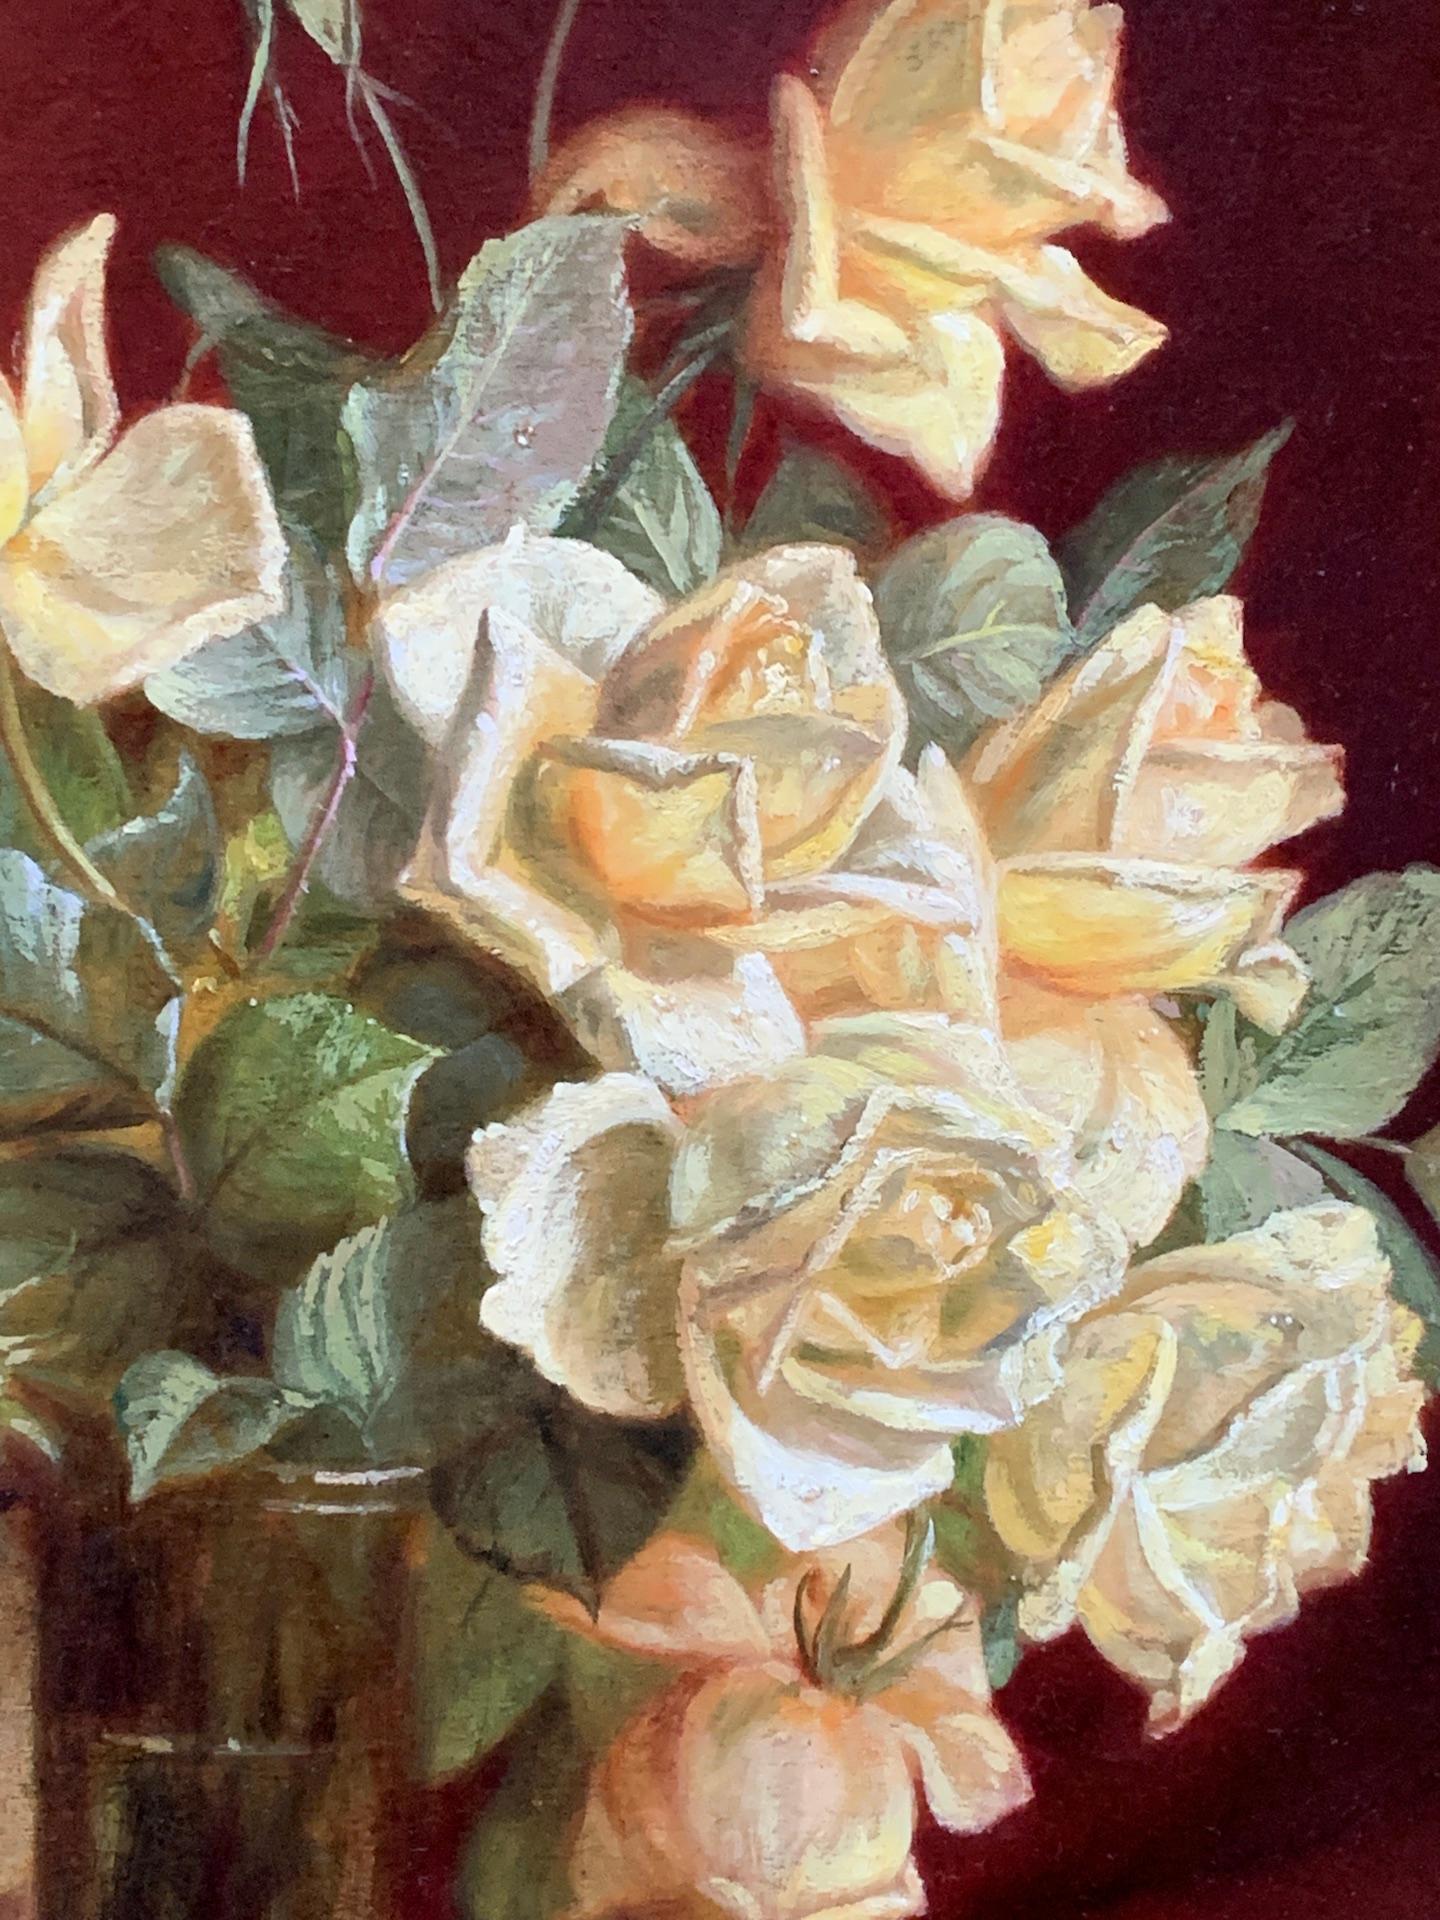 19th century English still life of Yellow Roses/flowers in an interior.

John Fitz Marshall was a painter of animals, landscapes and flower subjects. He was educated in and spent most of his life in Croydon. He is also thought to be the son of John